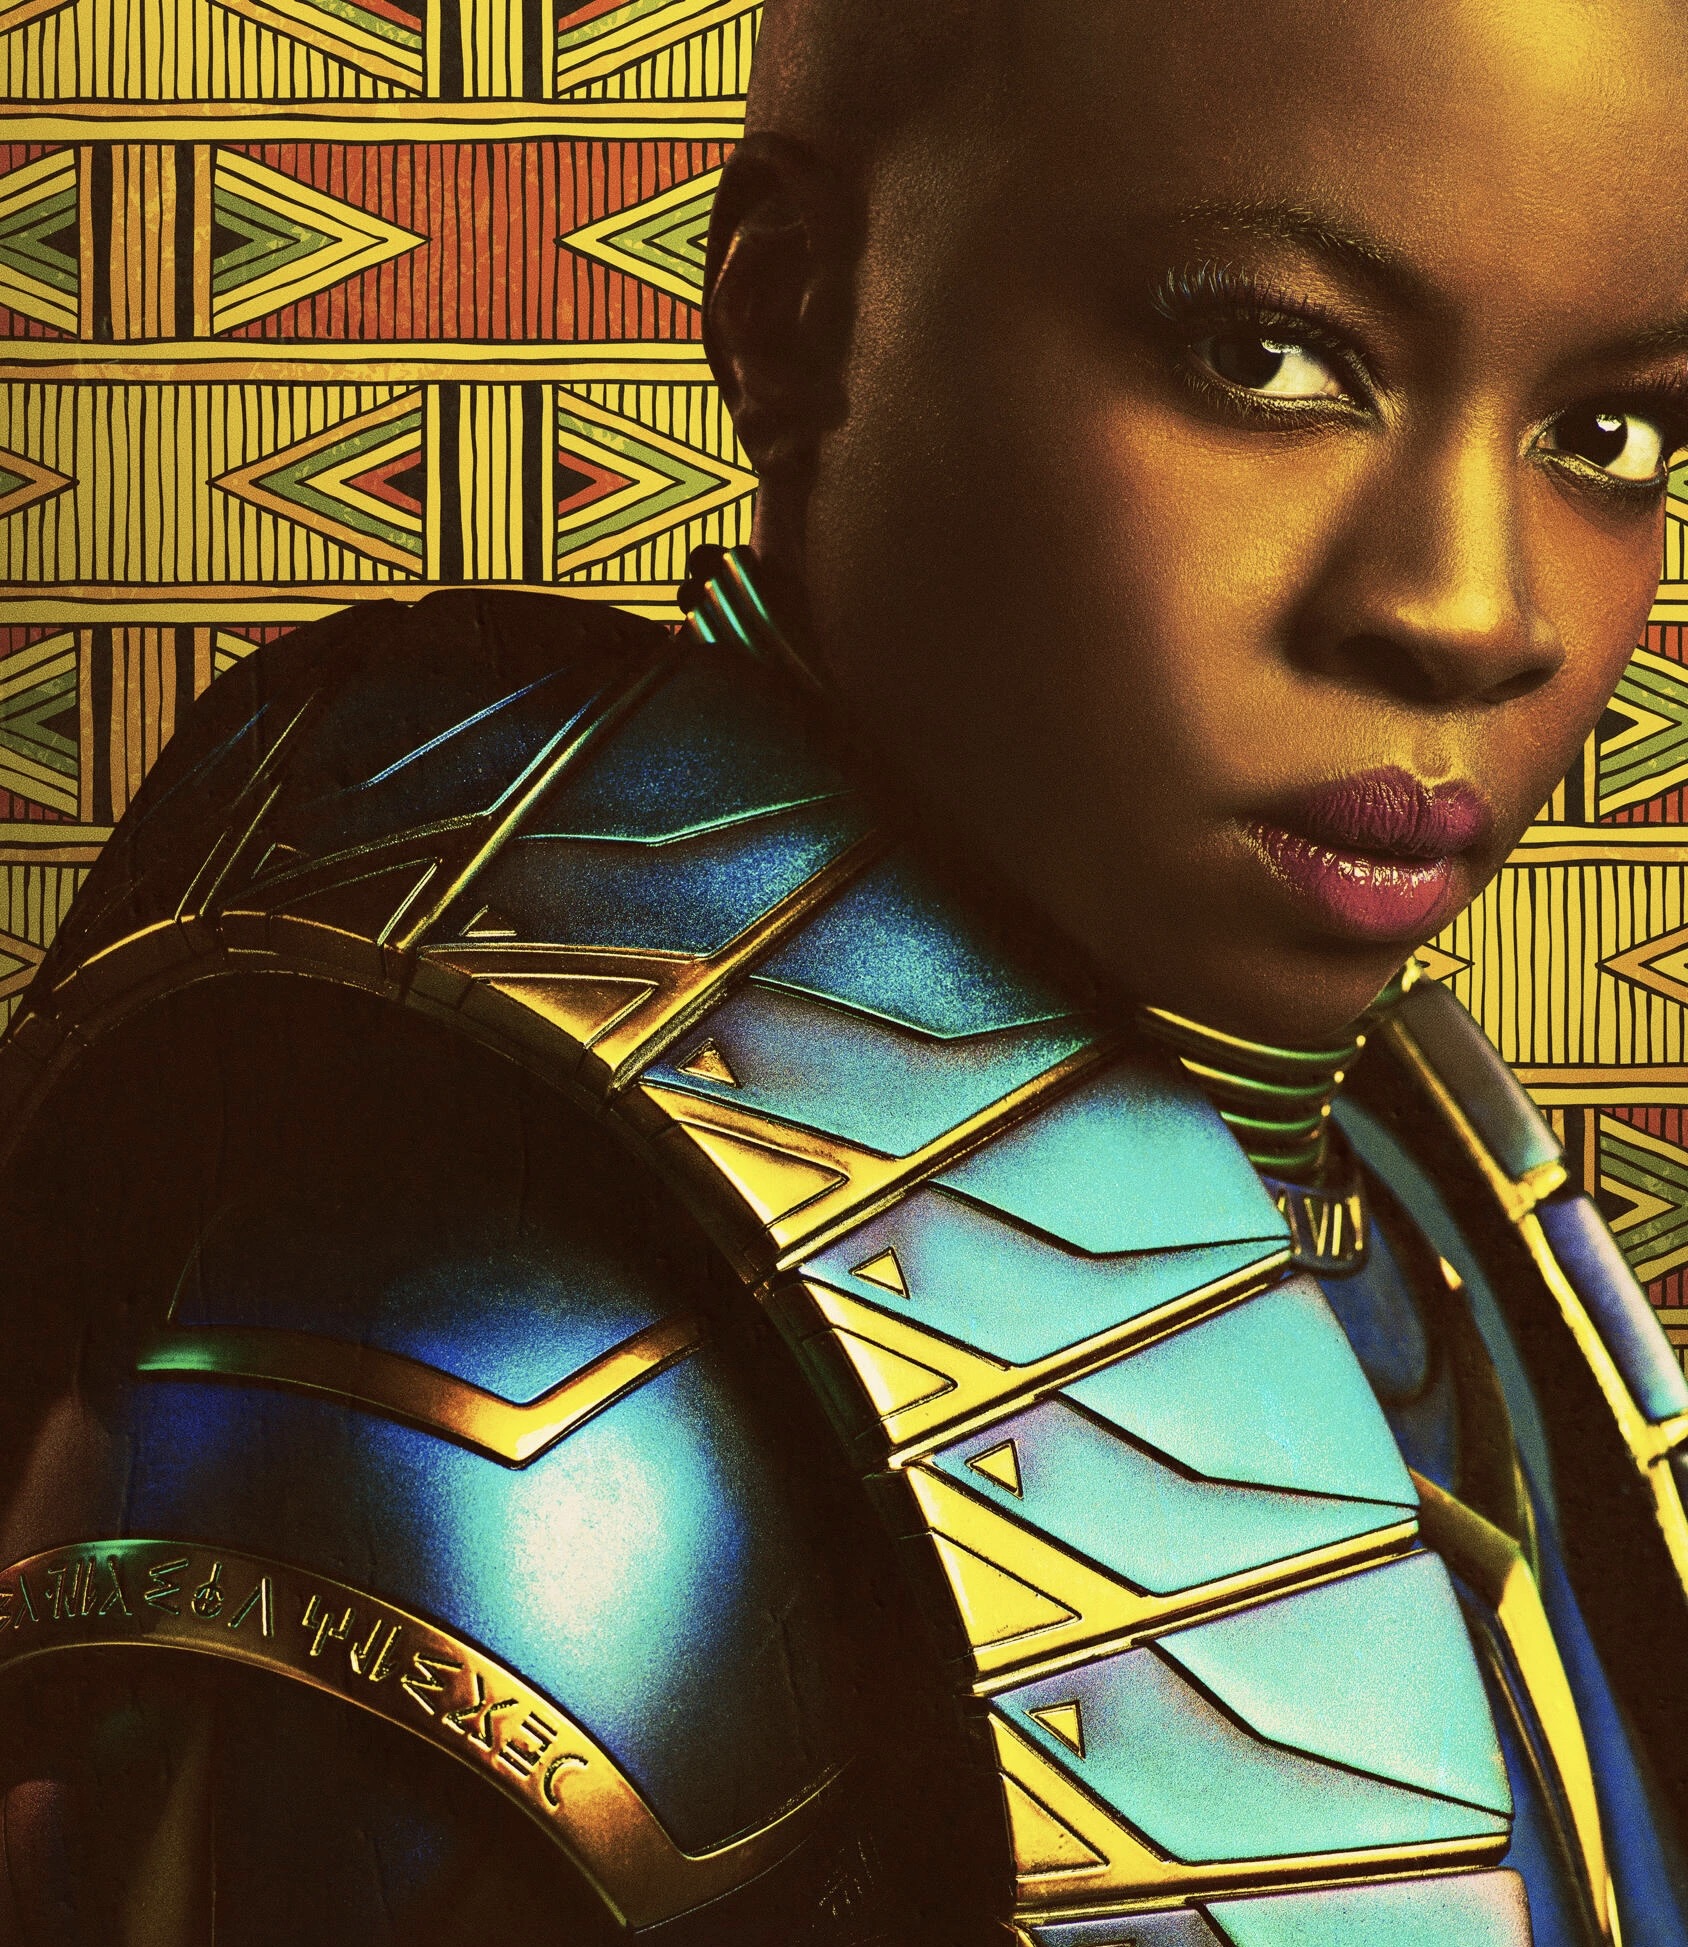 Black Panther, Character Profile Wikia